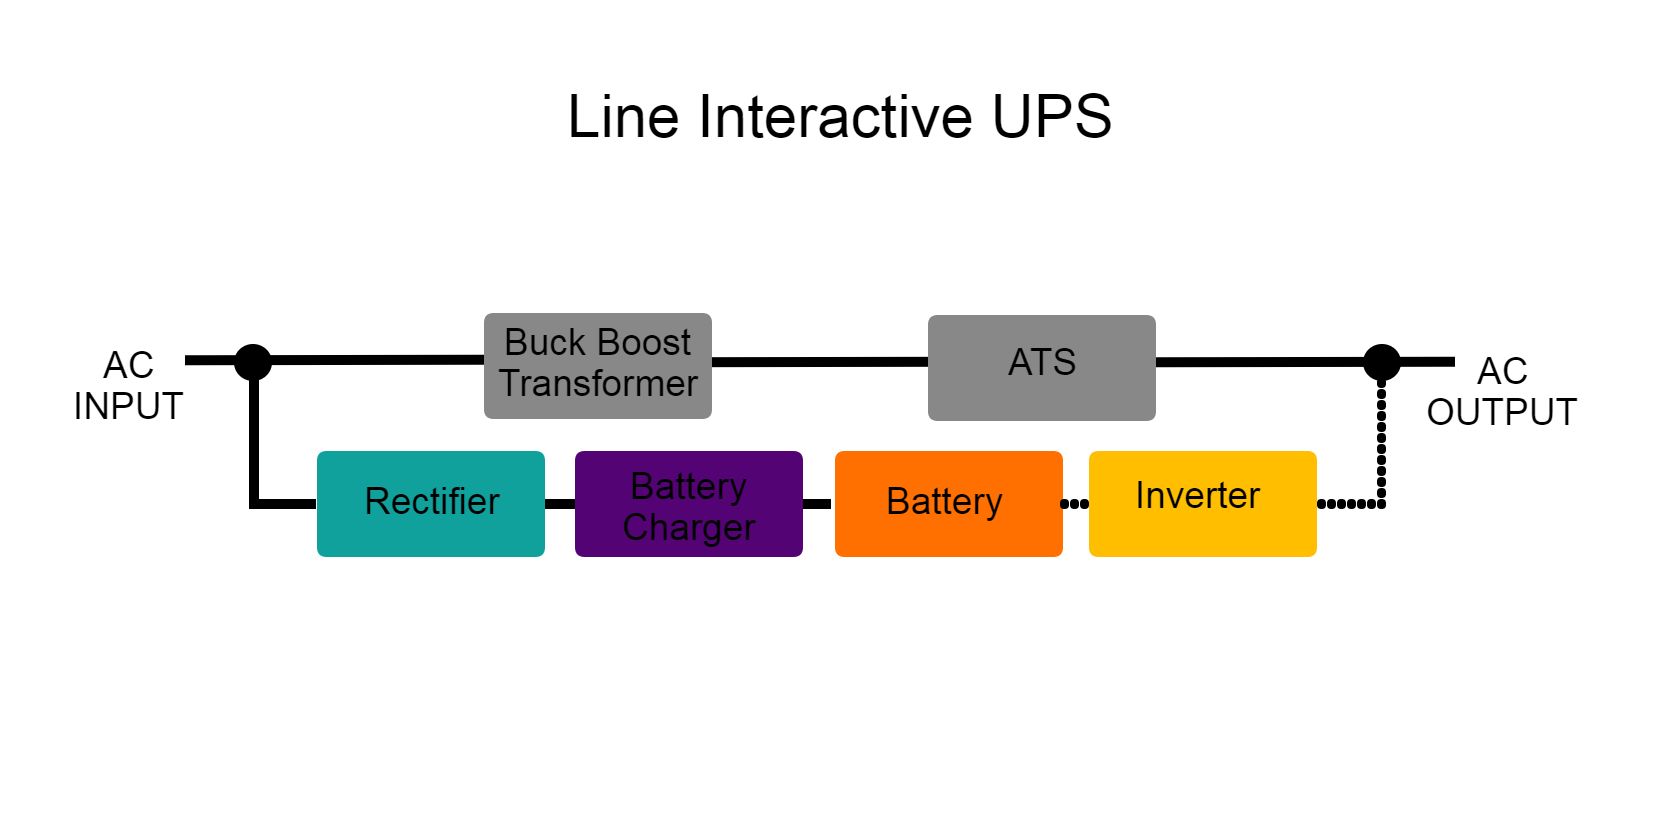 Illustration of online interactive UPS components